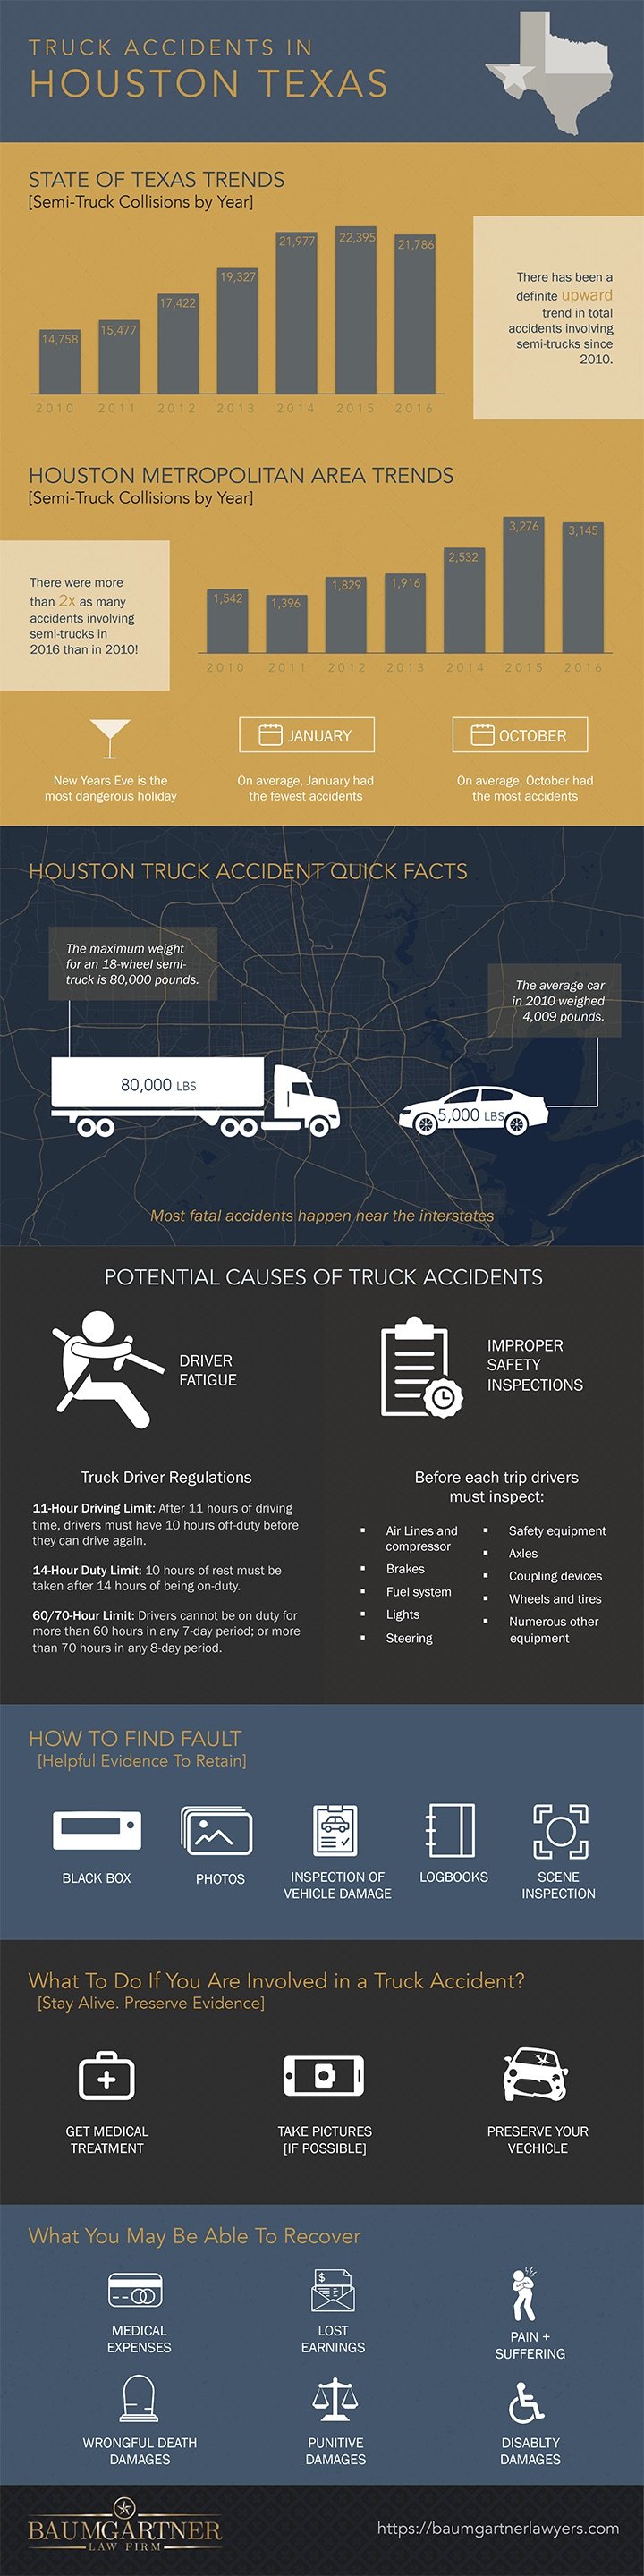 Truck Accidents in Houston, Texas